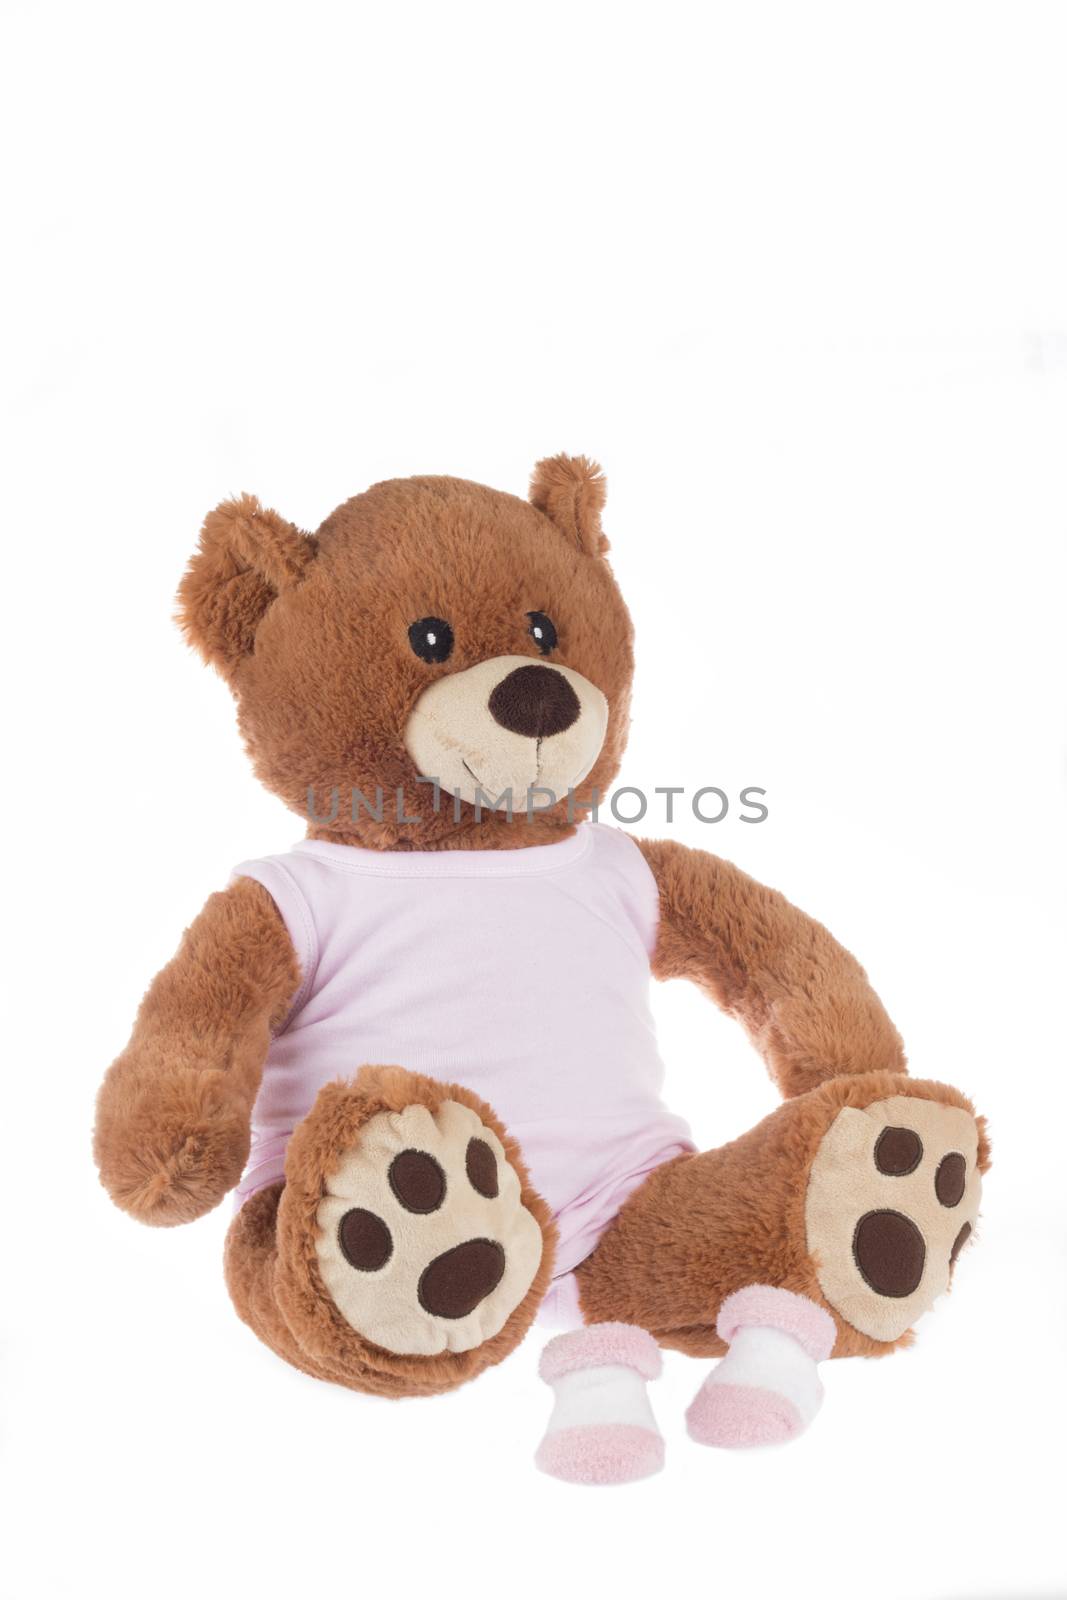 Teddy bear with pink shirt and socks, isolated on white background